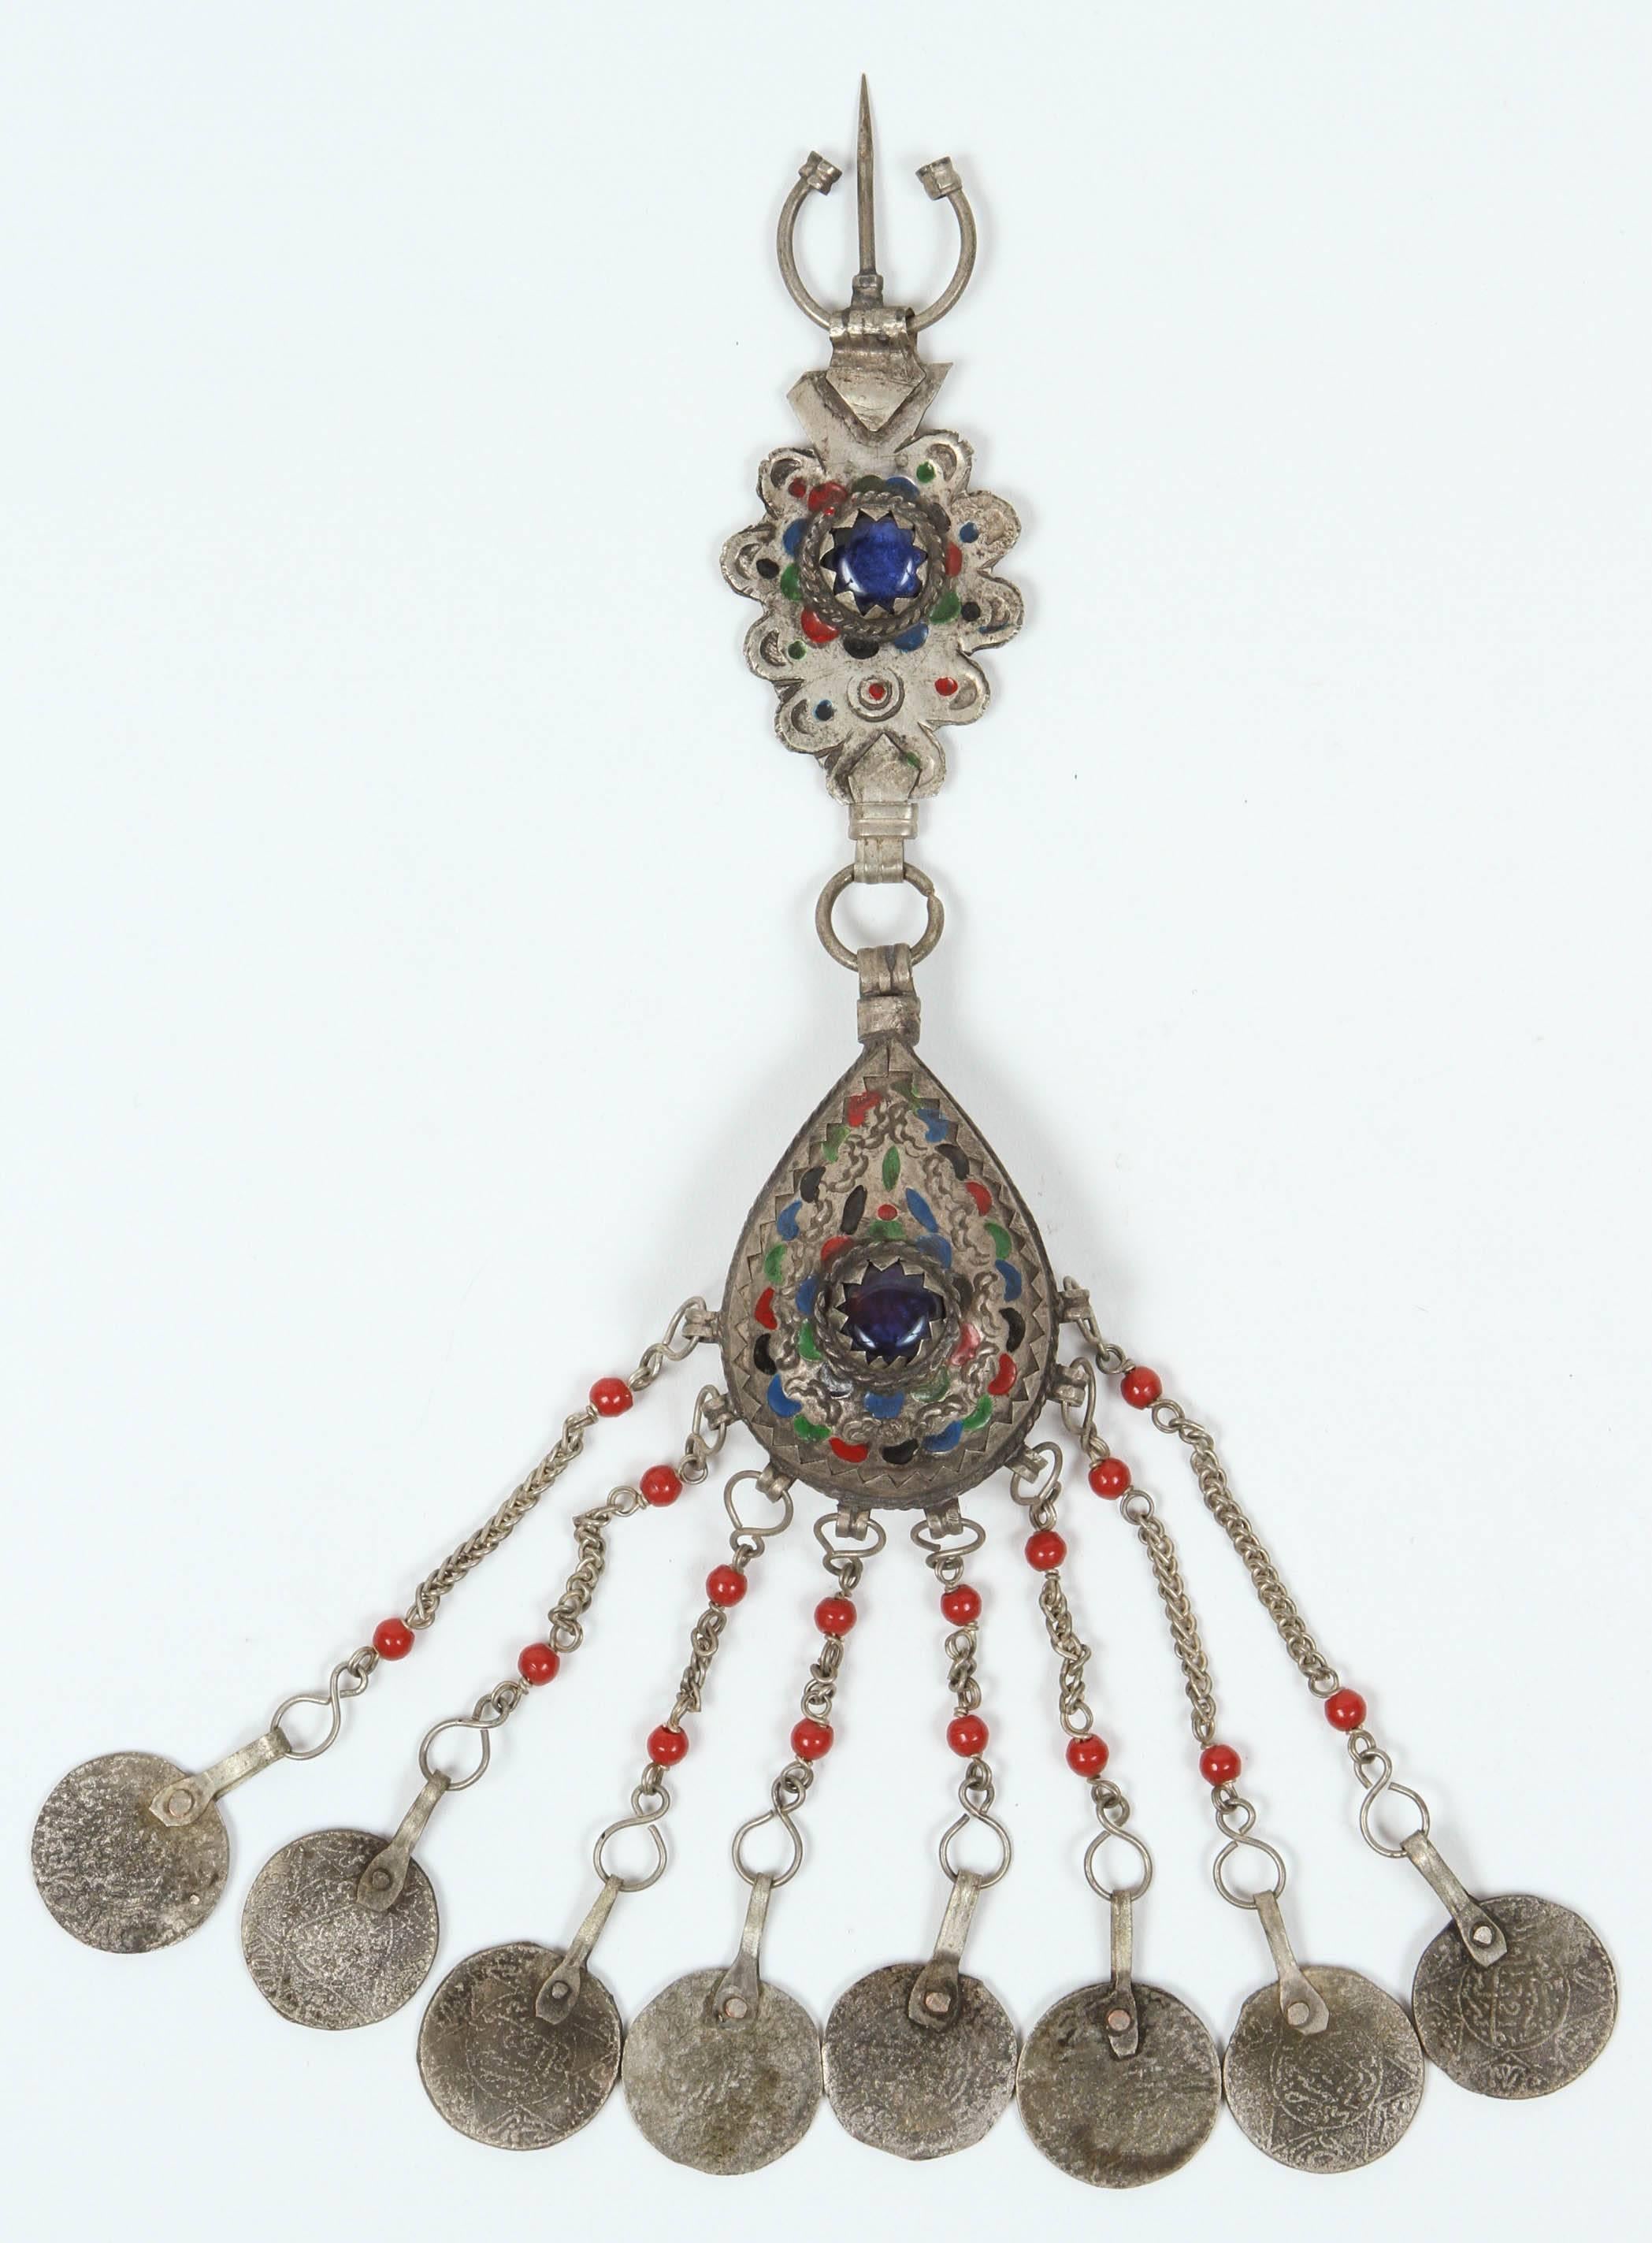 Beautiful pair of vintage Middle Eastern tribal fibulas. 
A fibula was used to close a woman's veil in the Middle East and Africa.
Handcrafted by Berber and Nomadic Women from the High Atlas of Morocco.
Made of Moroccan silver ( not sterling) and